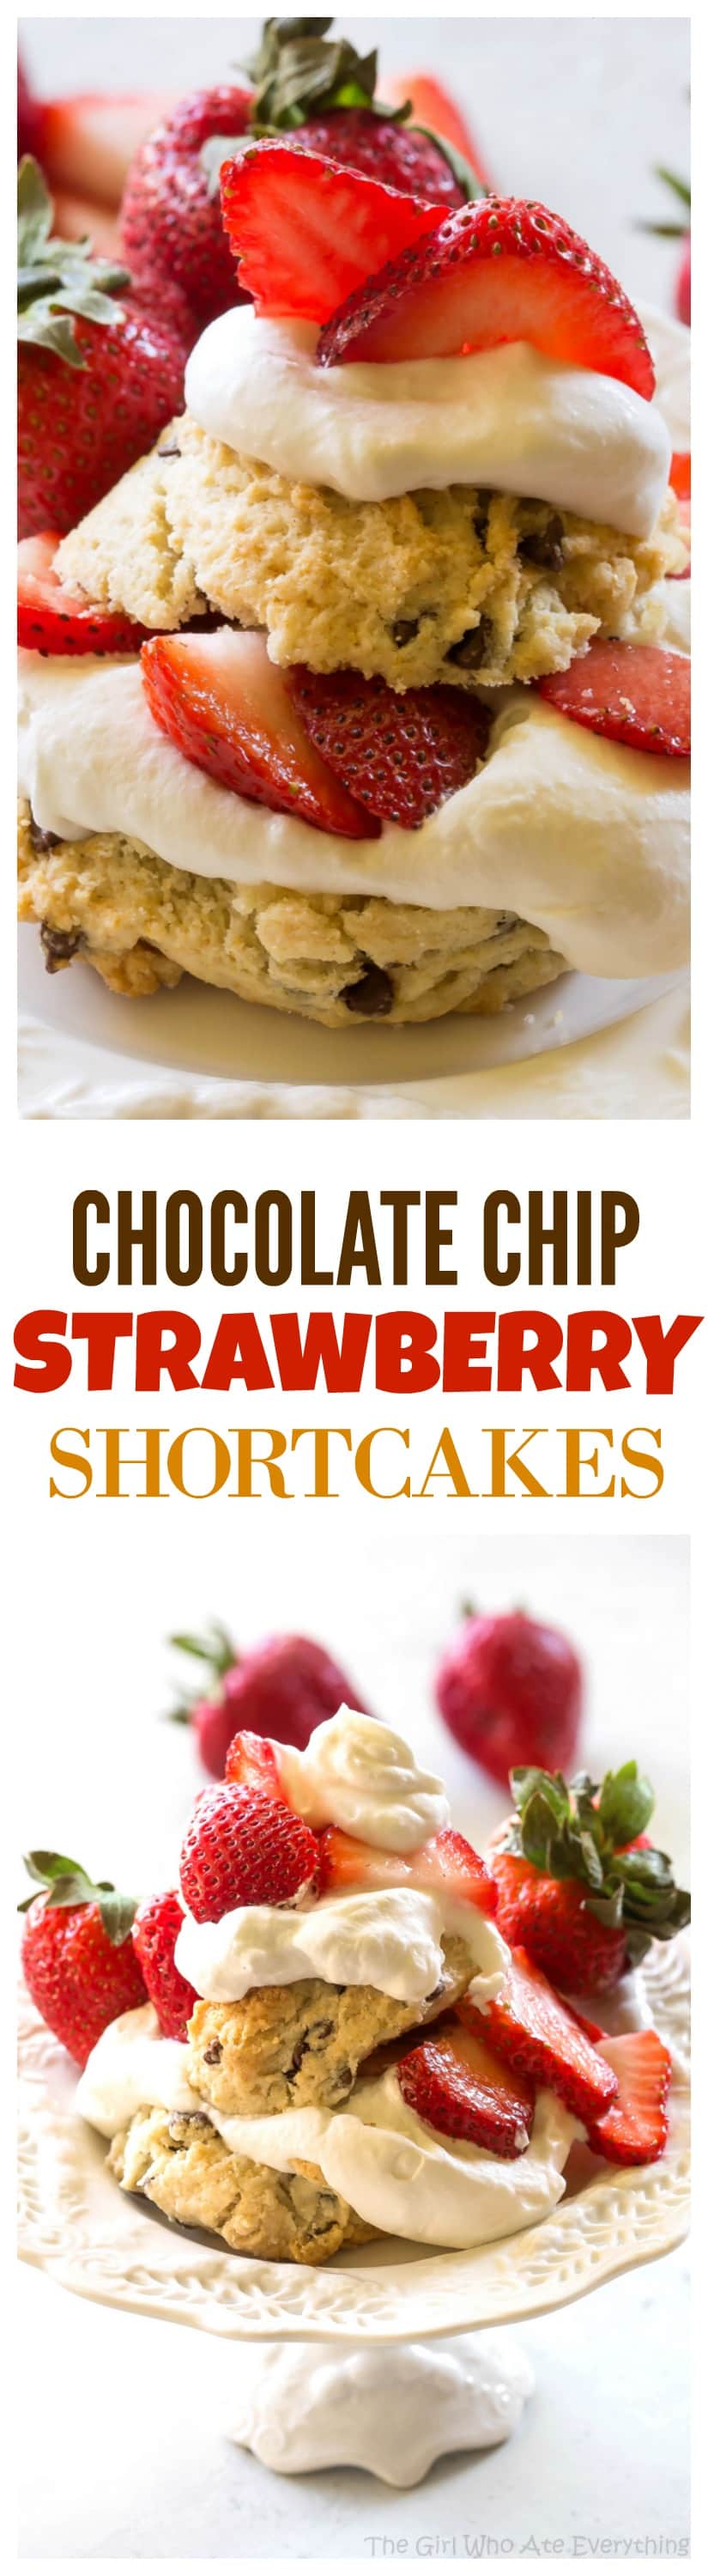 These Chocolate Chip Strawberry Shortcake is melt in your mouth buttery shortcake with mini chocolate chips topped with strawberries and whipped cream. A fun summer dessert. I have struggled for so long to find a Strawberry Shortcake that I love and this Chocolate Chip Strawberry Shortcake is divine! #strawberry #shortcake #chocolate #dessert